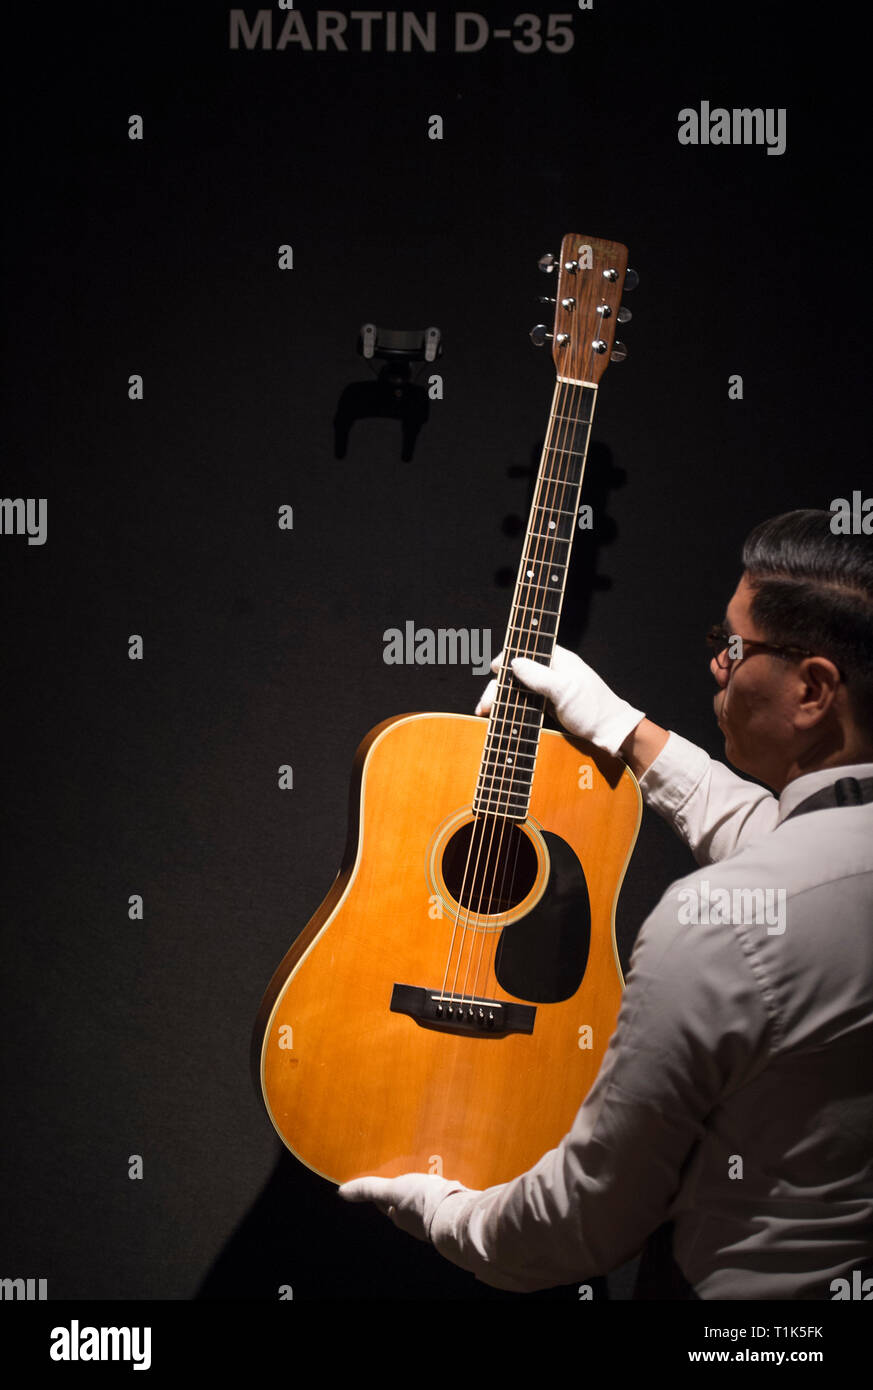 Christies, King Street, London, UK. 27 March, 2019. Christie's unveil the  much-anticipated preview of the personal guitar collection of rock'n'roll  legend David Gilmour, guitarist, singer and songwriter of Pink Floyd. The  first